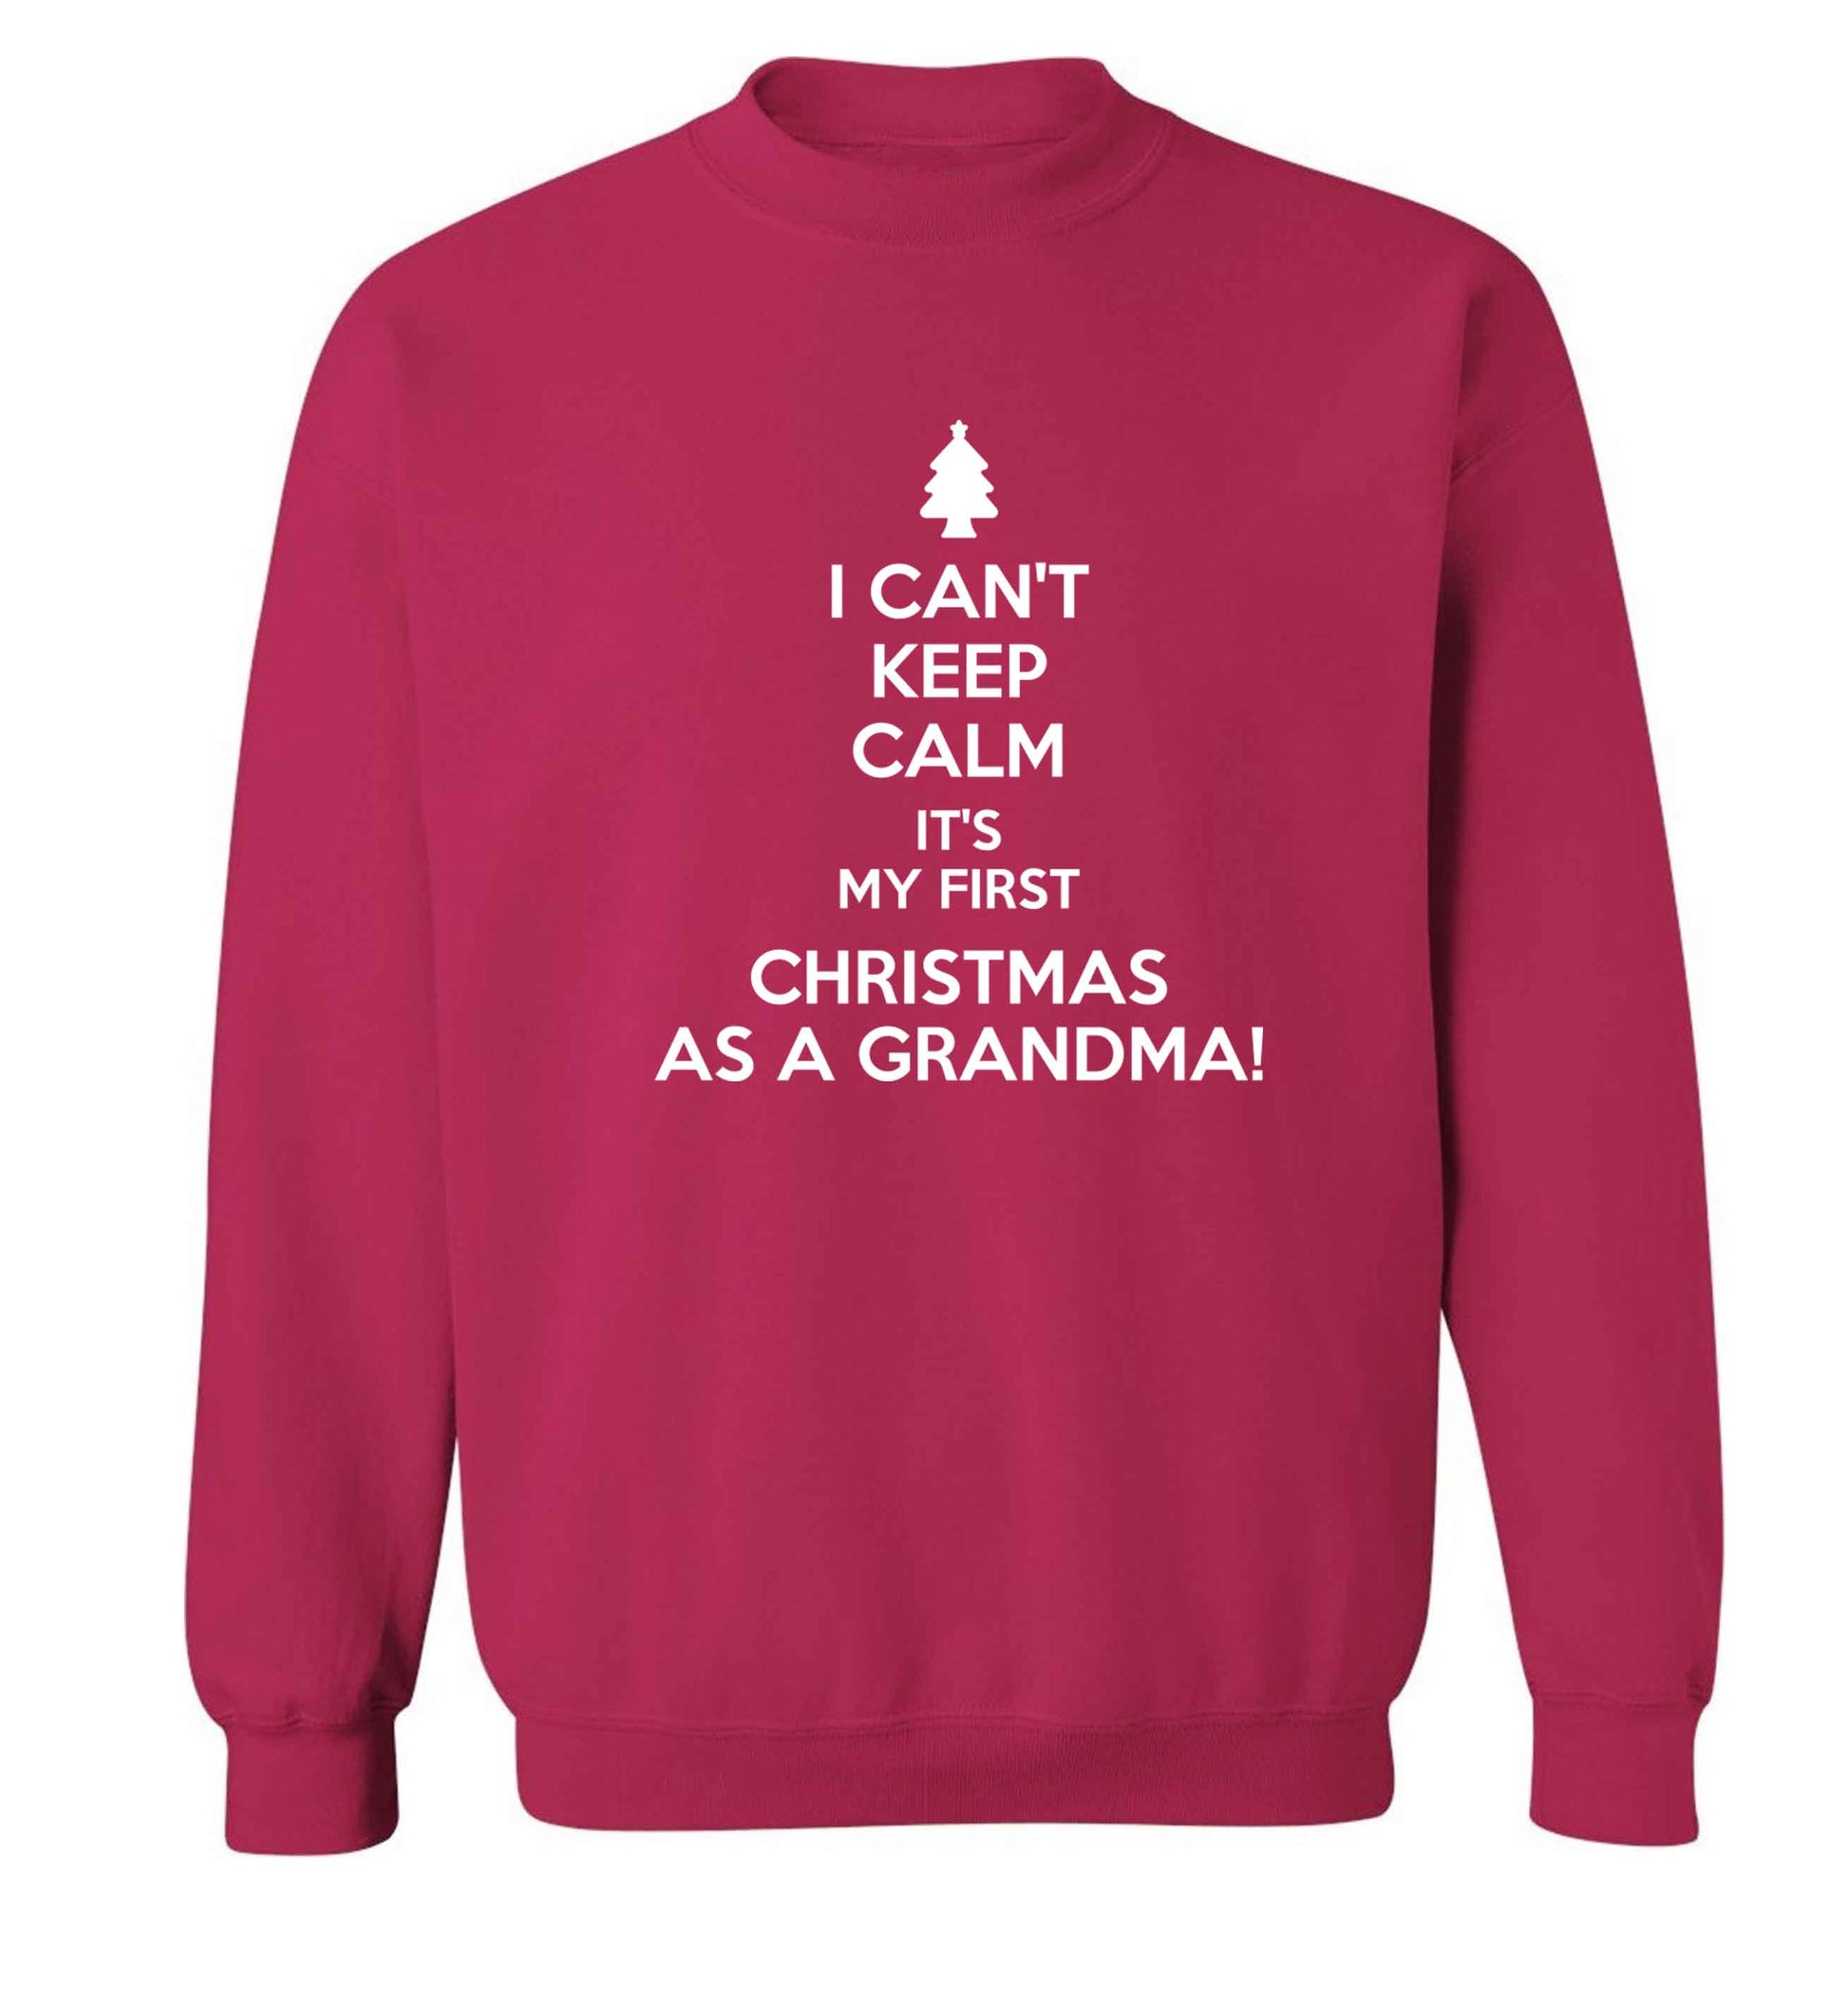 I can't keep calm it's my first Christmas as a grandma! Adult's unisex pink Sweater 2XL